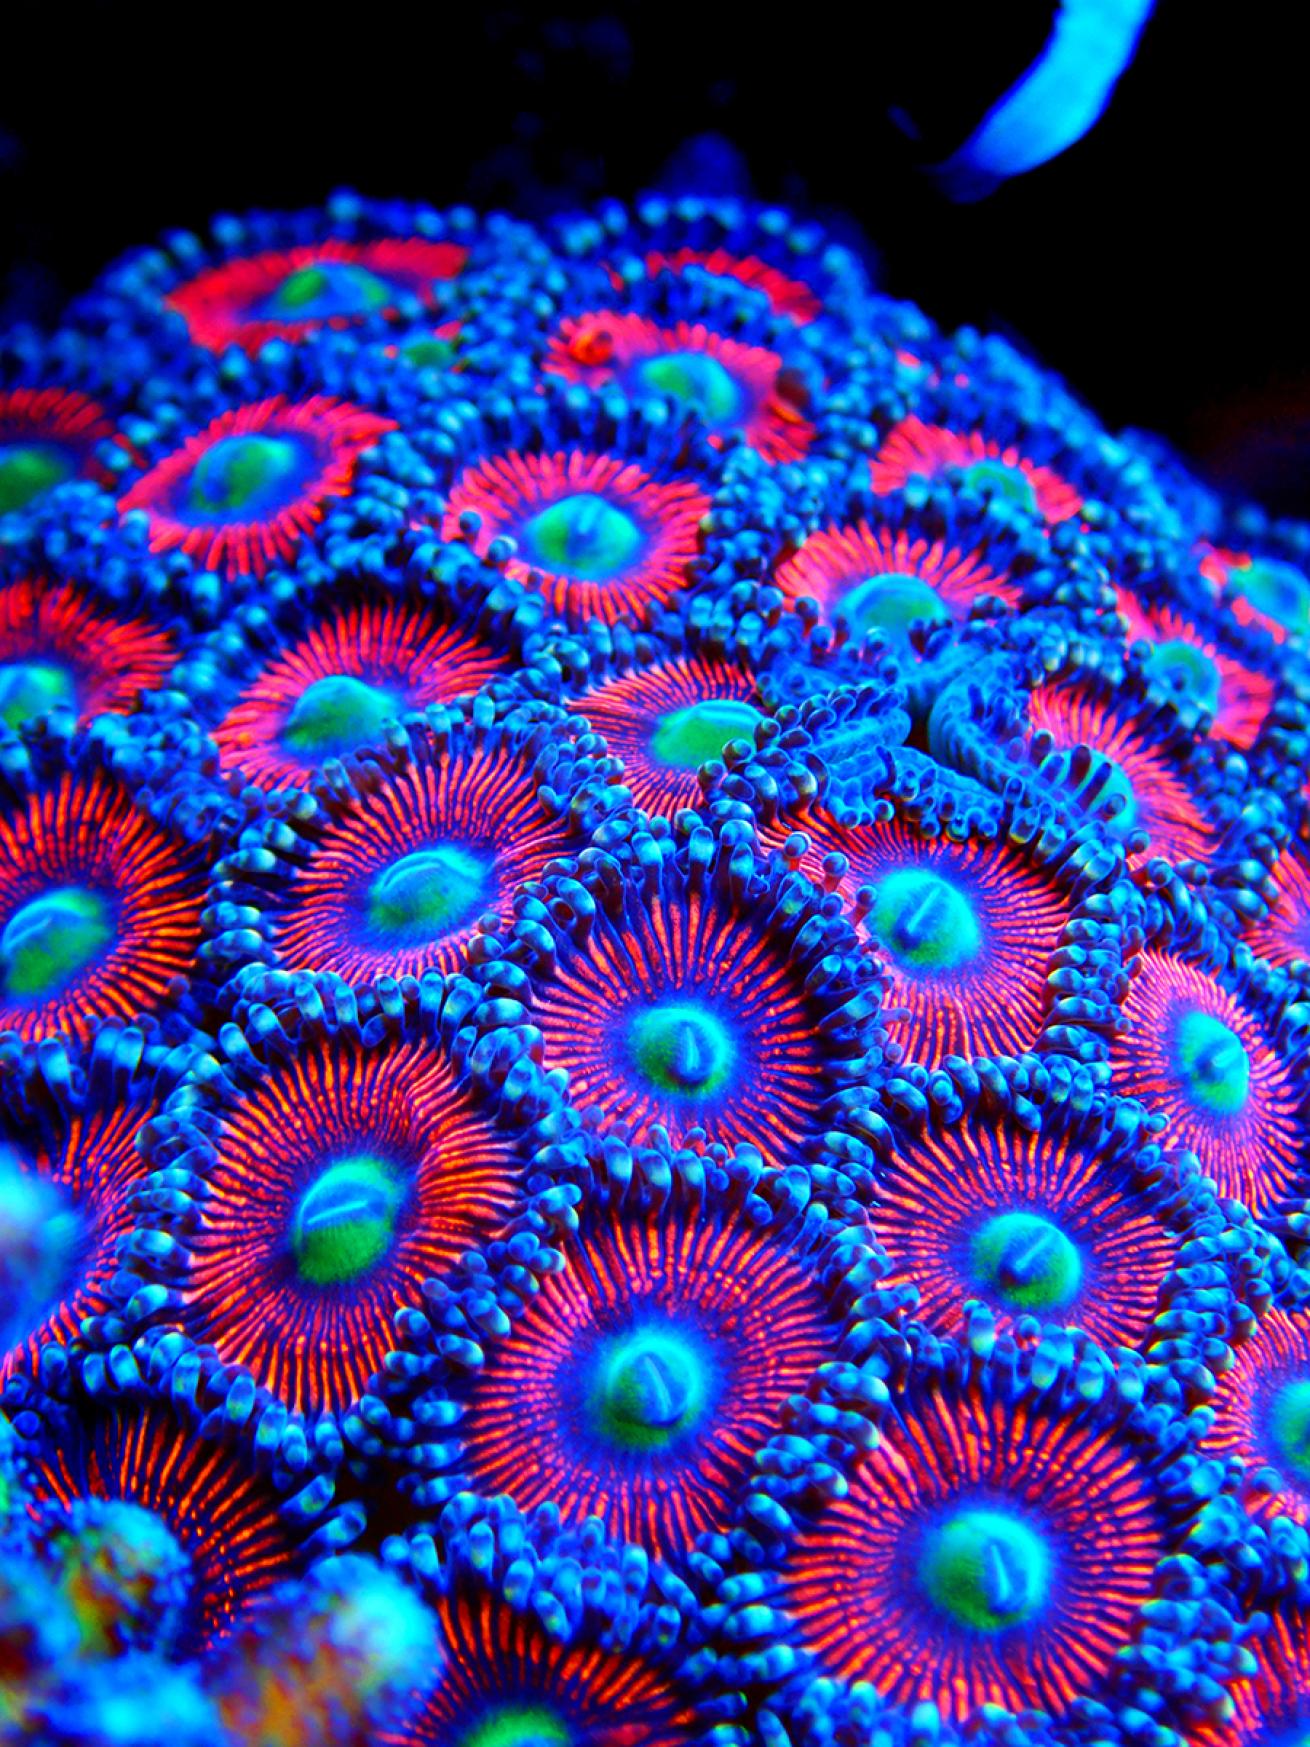 Bright red and blue coral polyps